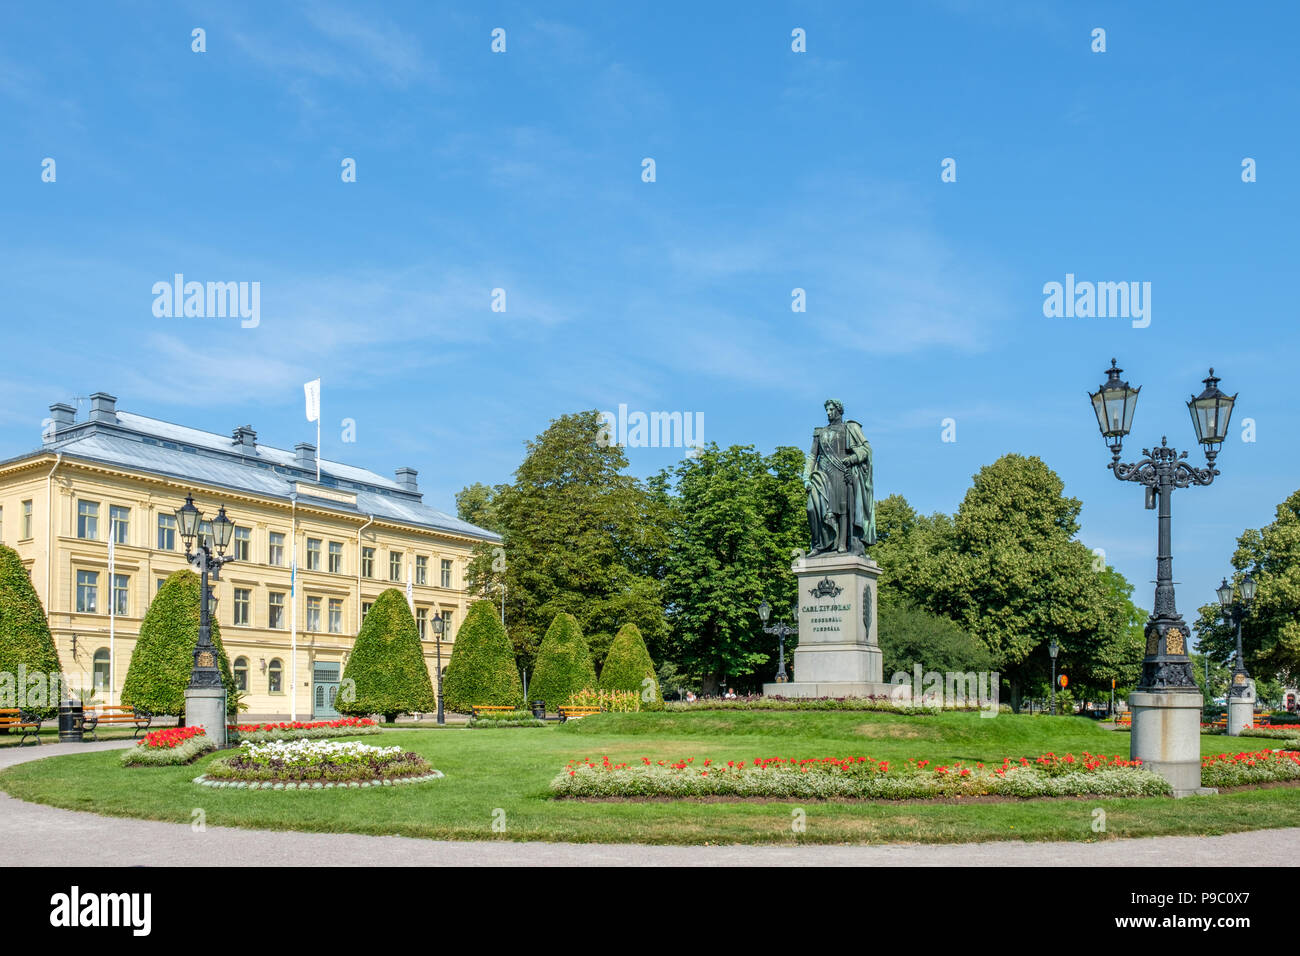 Karl Johans park with the statue of king Karl Johan XIV. Karl Johan was the first king of the Bernadotte family. Stock Photo